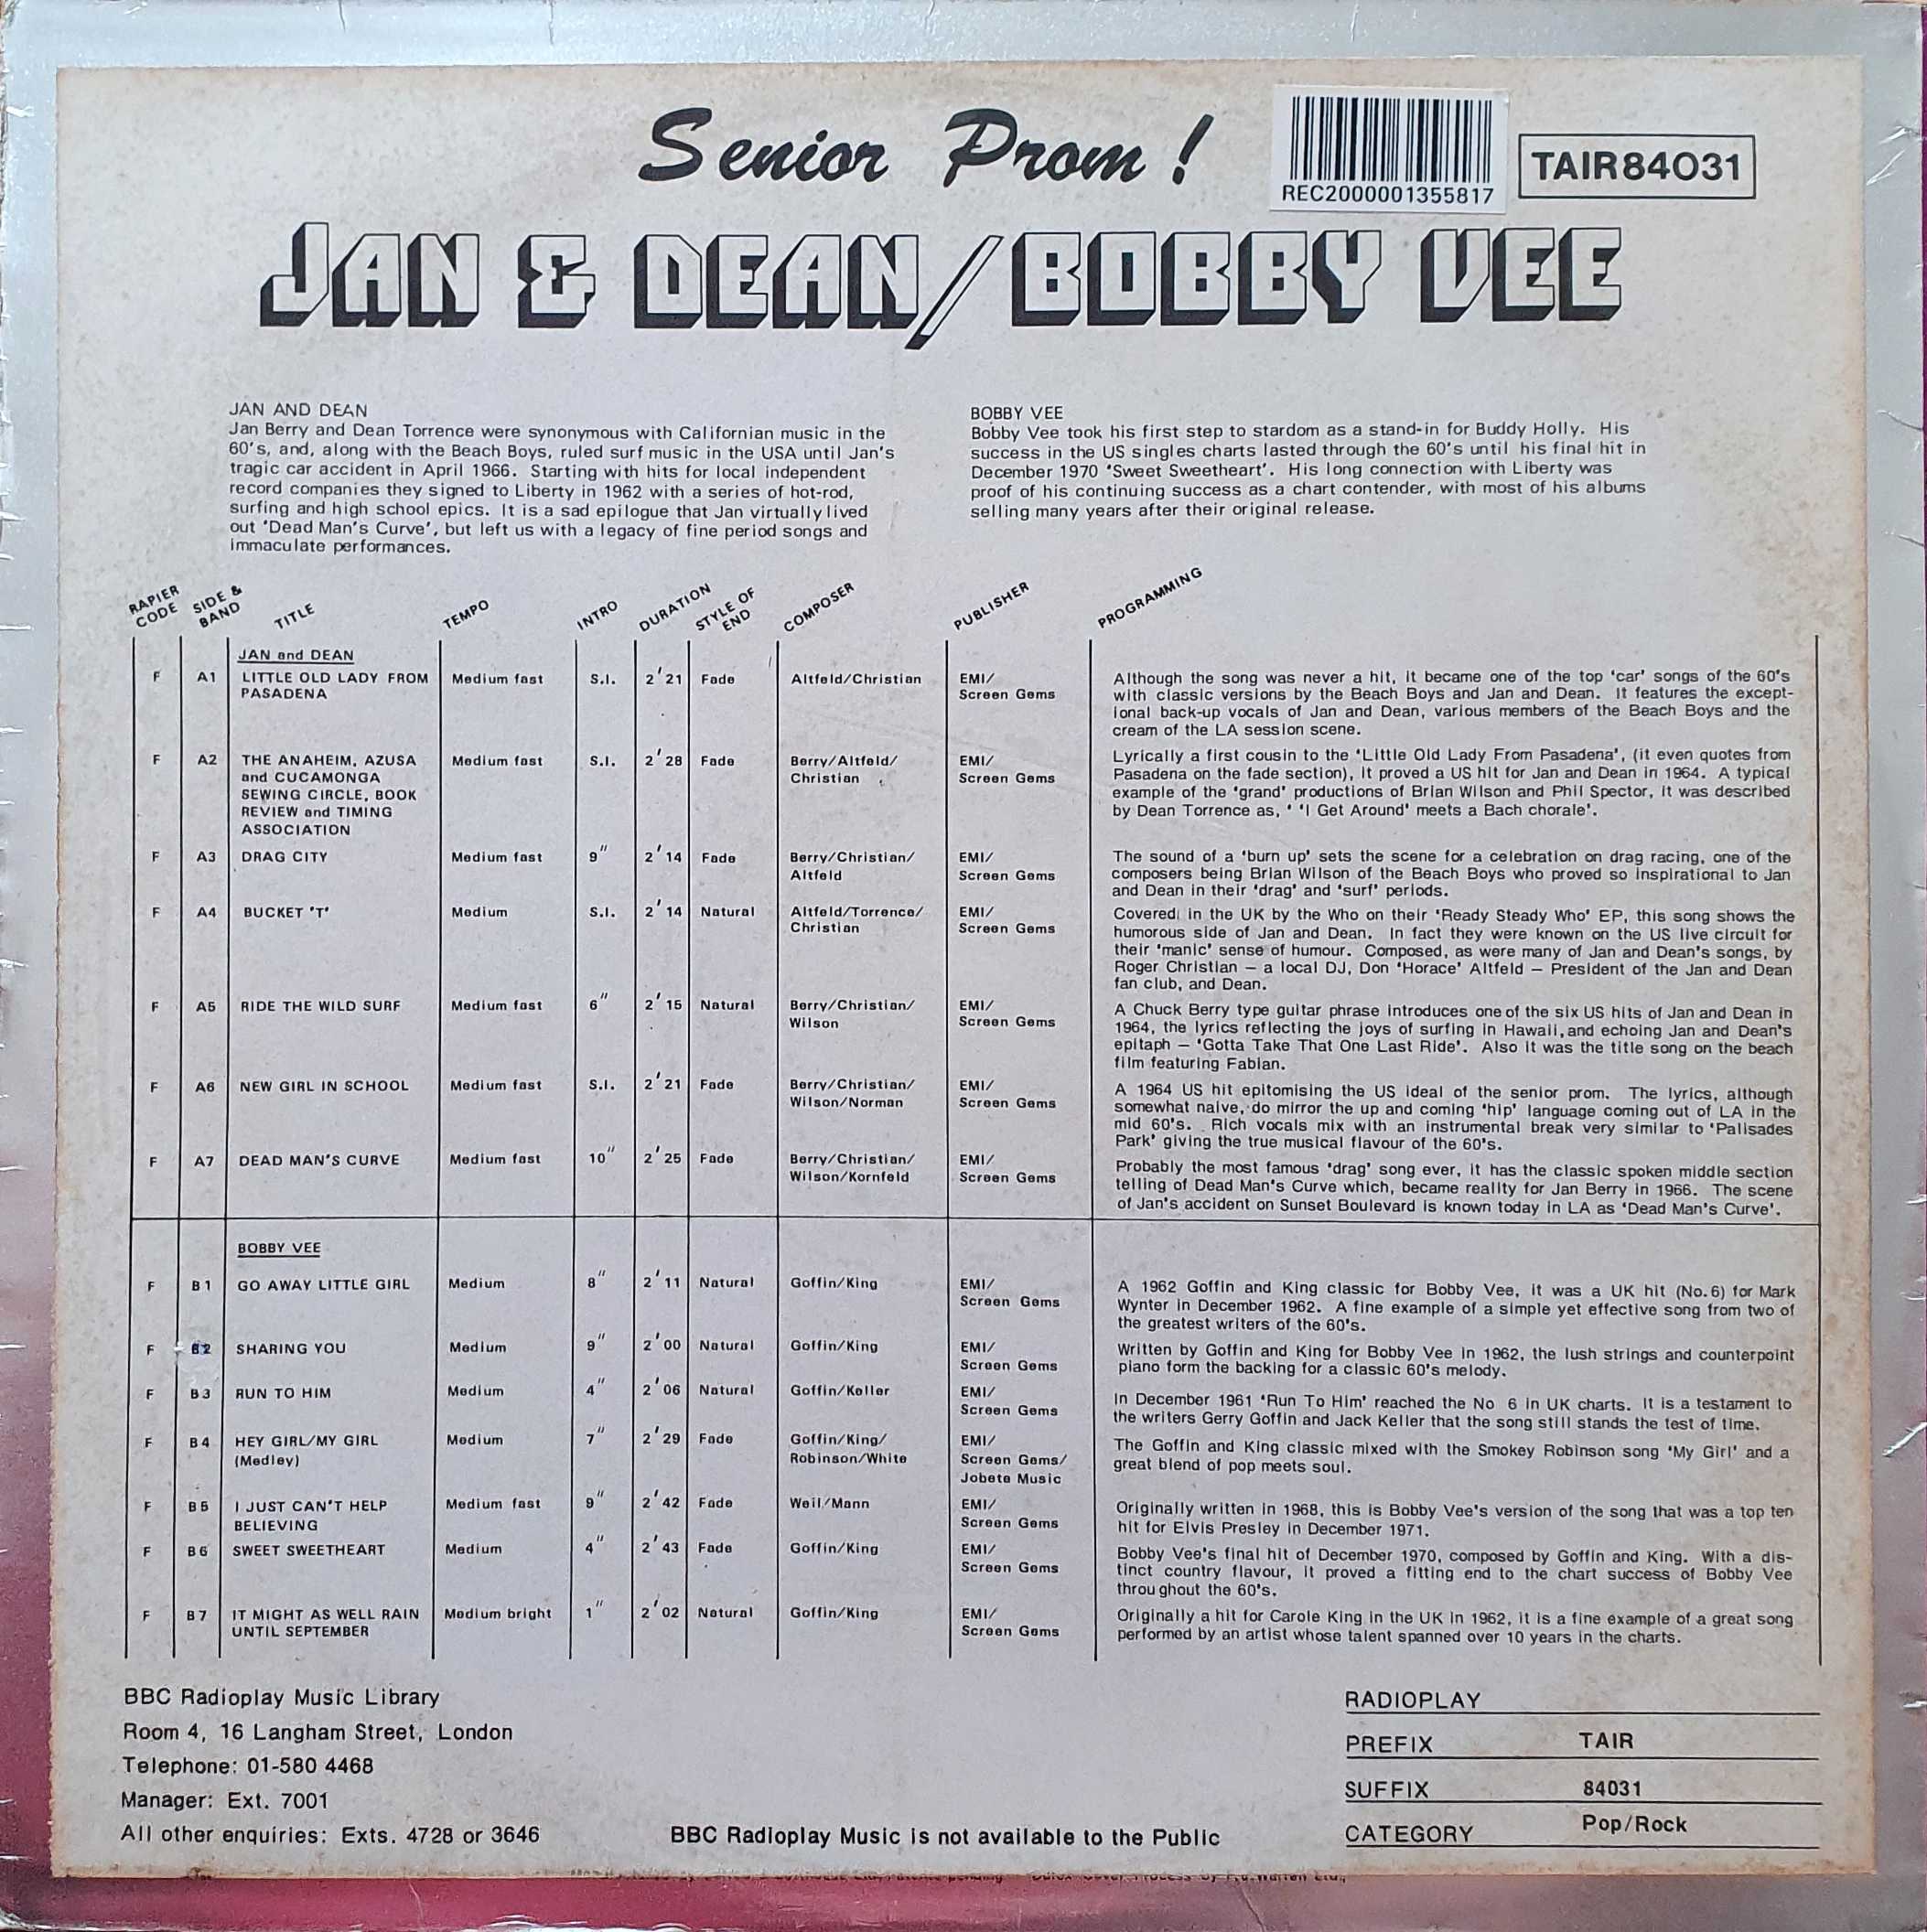 Picture of TAIR 84031 Senior prom! by artist Various from the BBC records and Tapes library